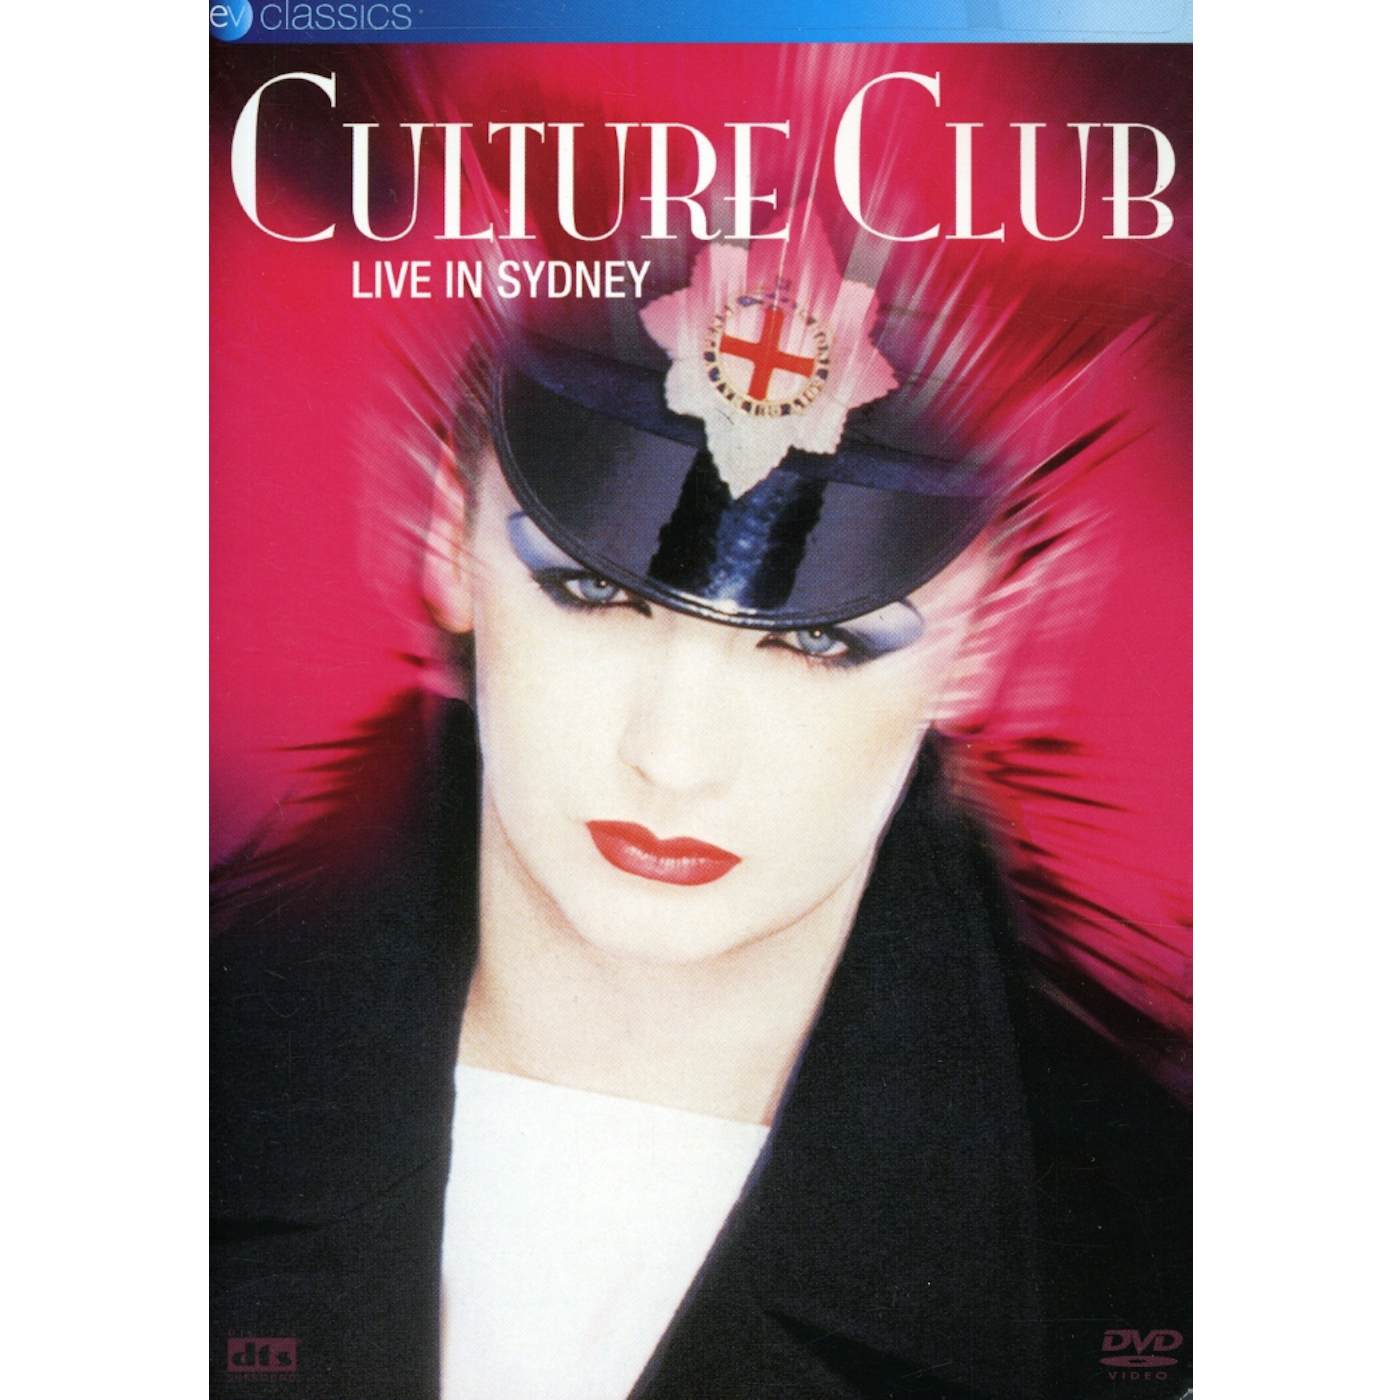 Culture Club LIVE IN SYDNEY DVD